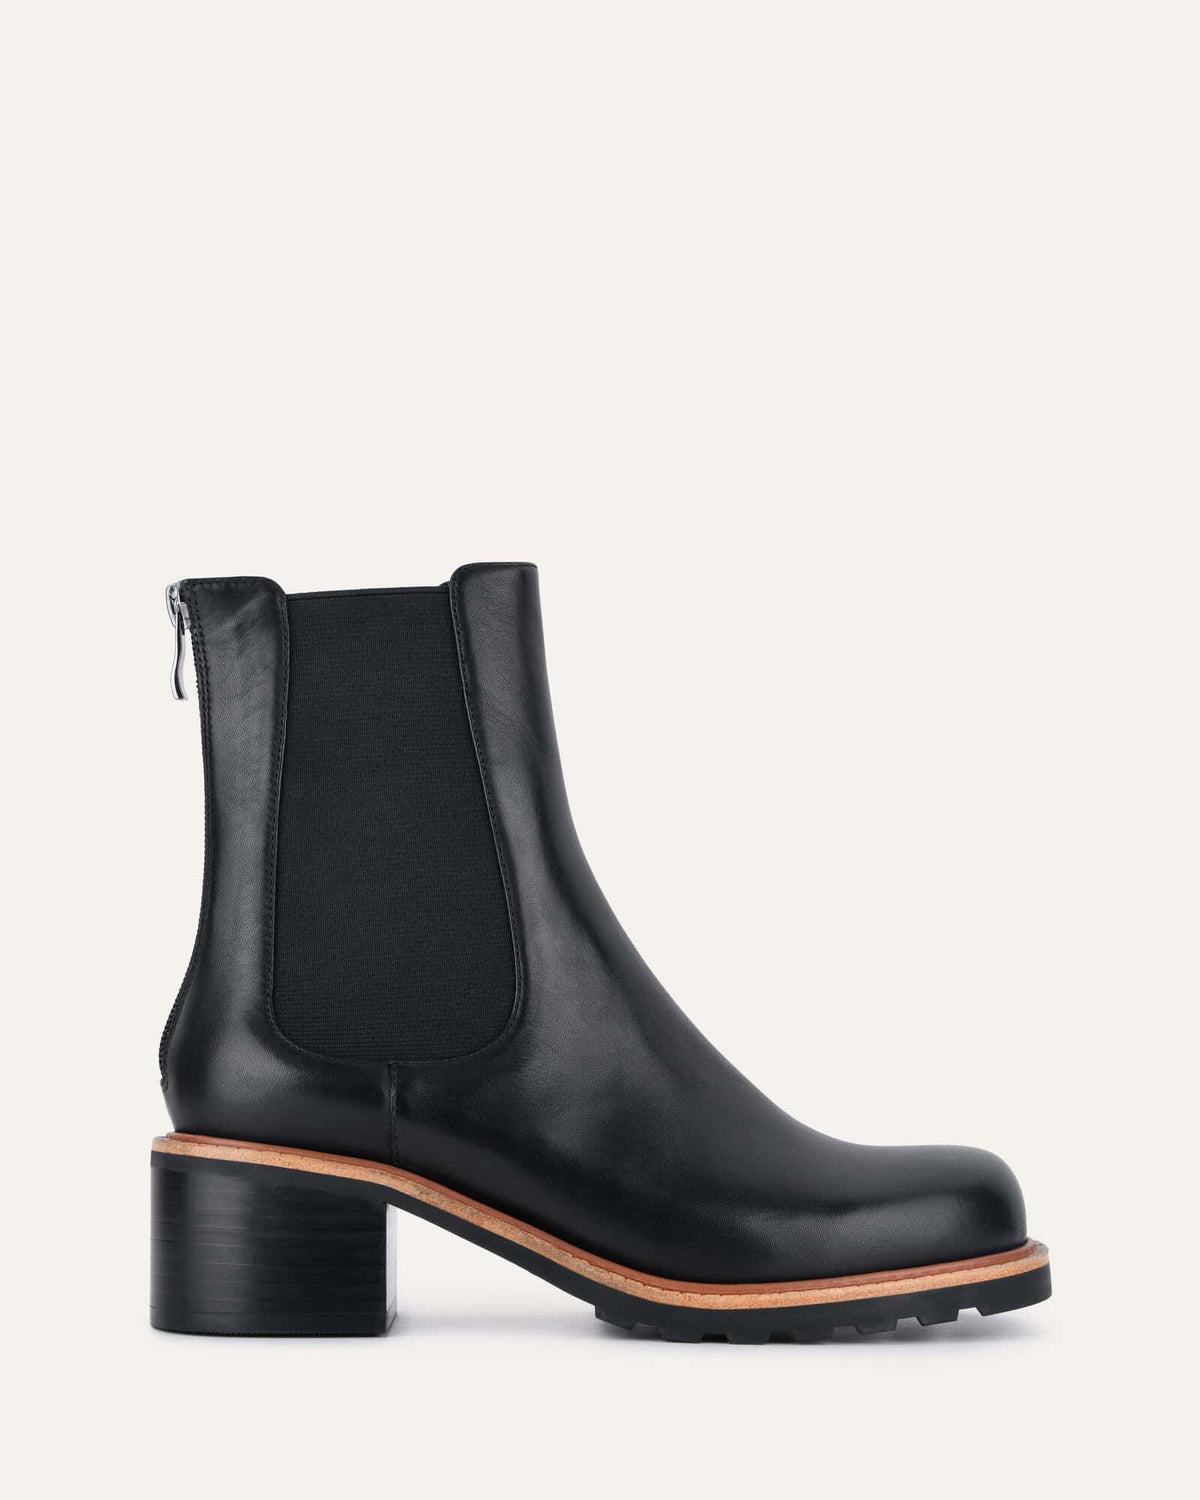 BEVERLEY MID ANKLE BOOTS BLACK LEATHER